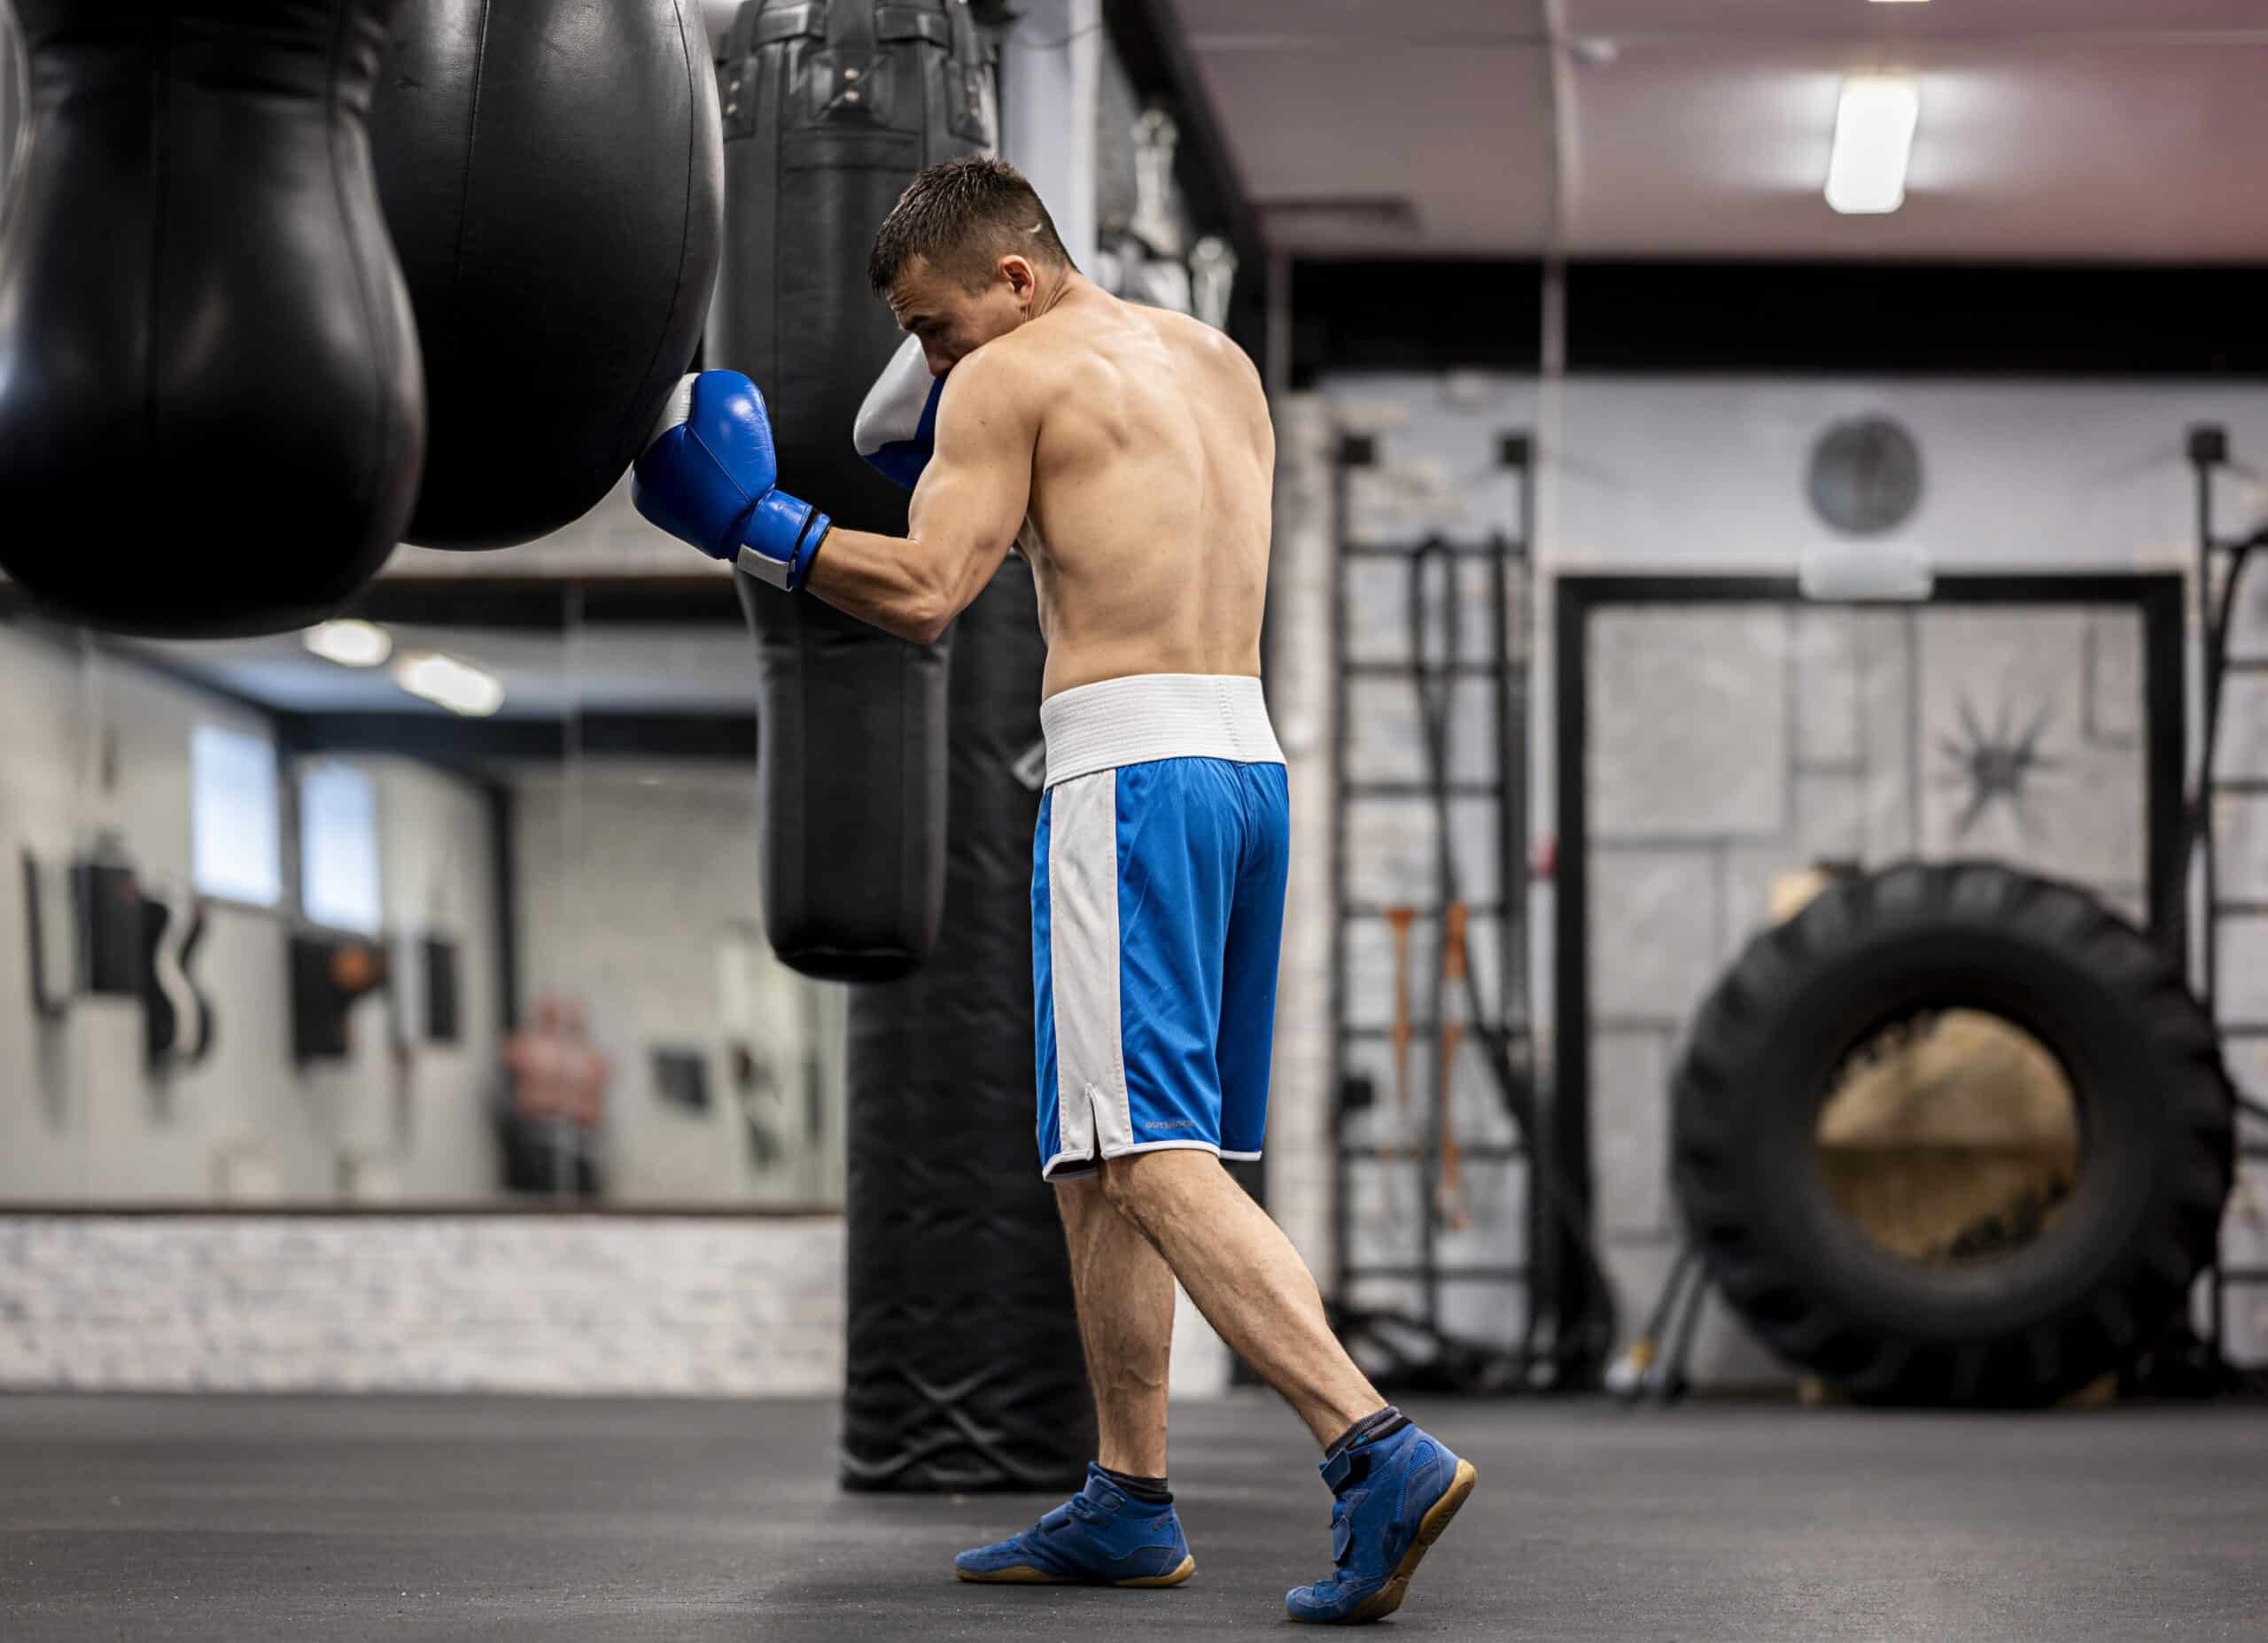 5 Benefits Your Body Gets from Boxing Workouts